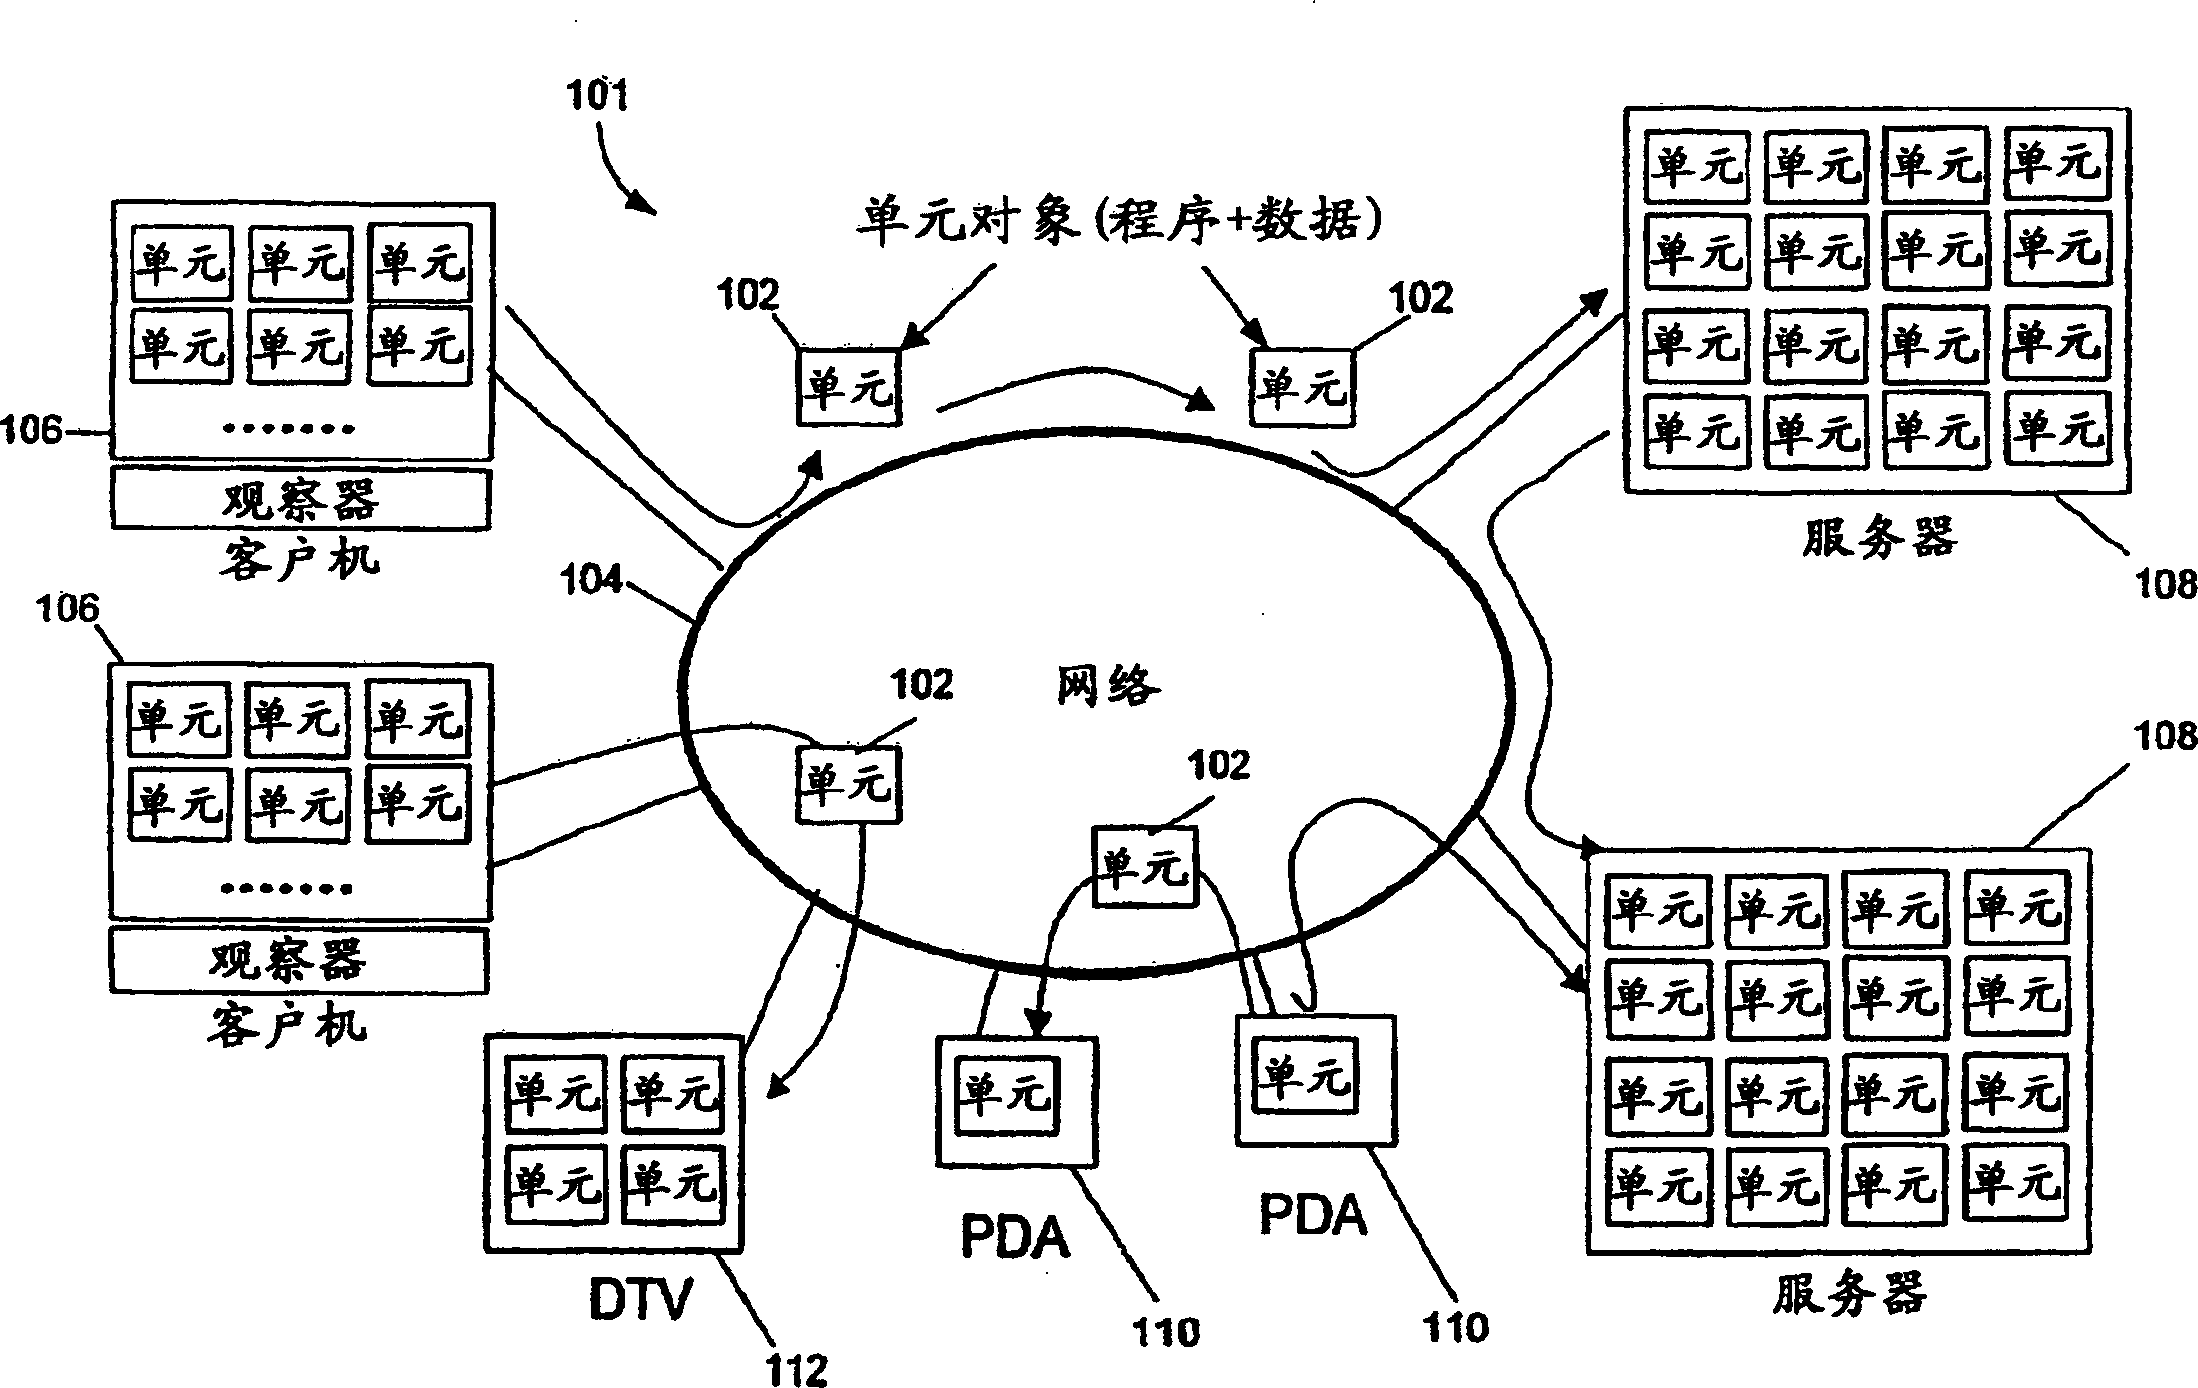 Processing modules for computer architecture for broadband networks